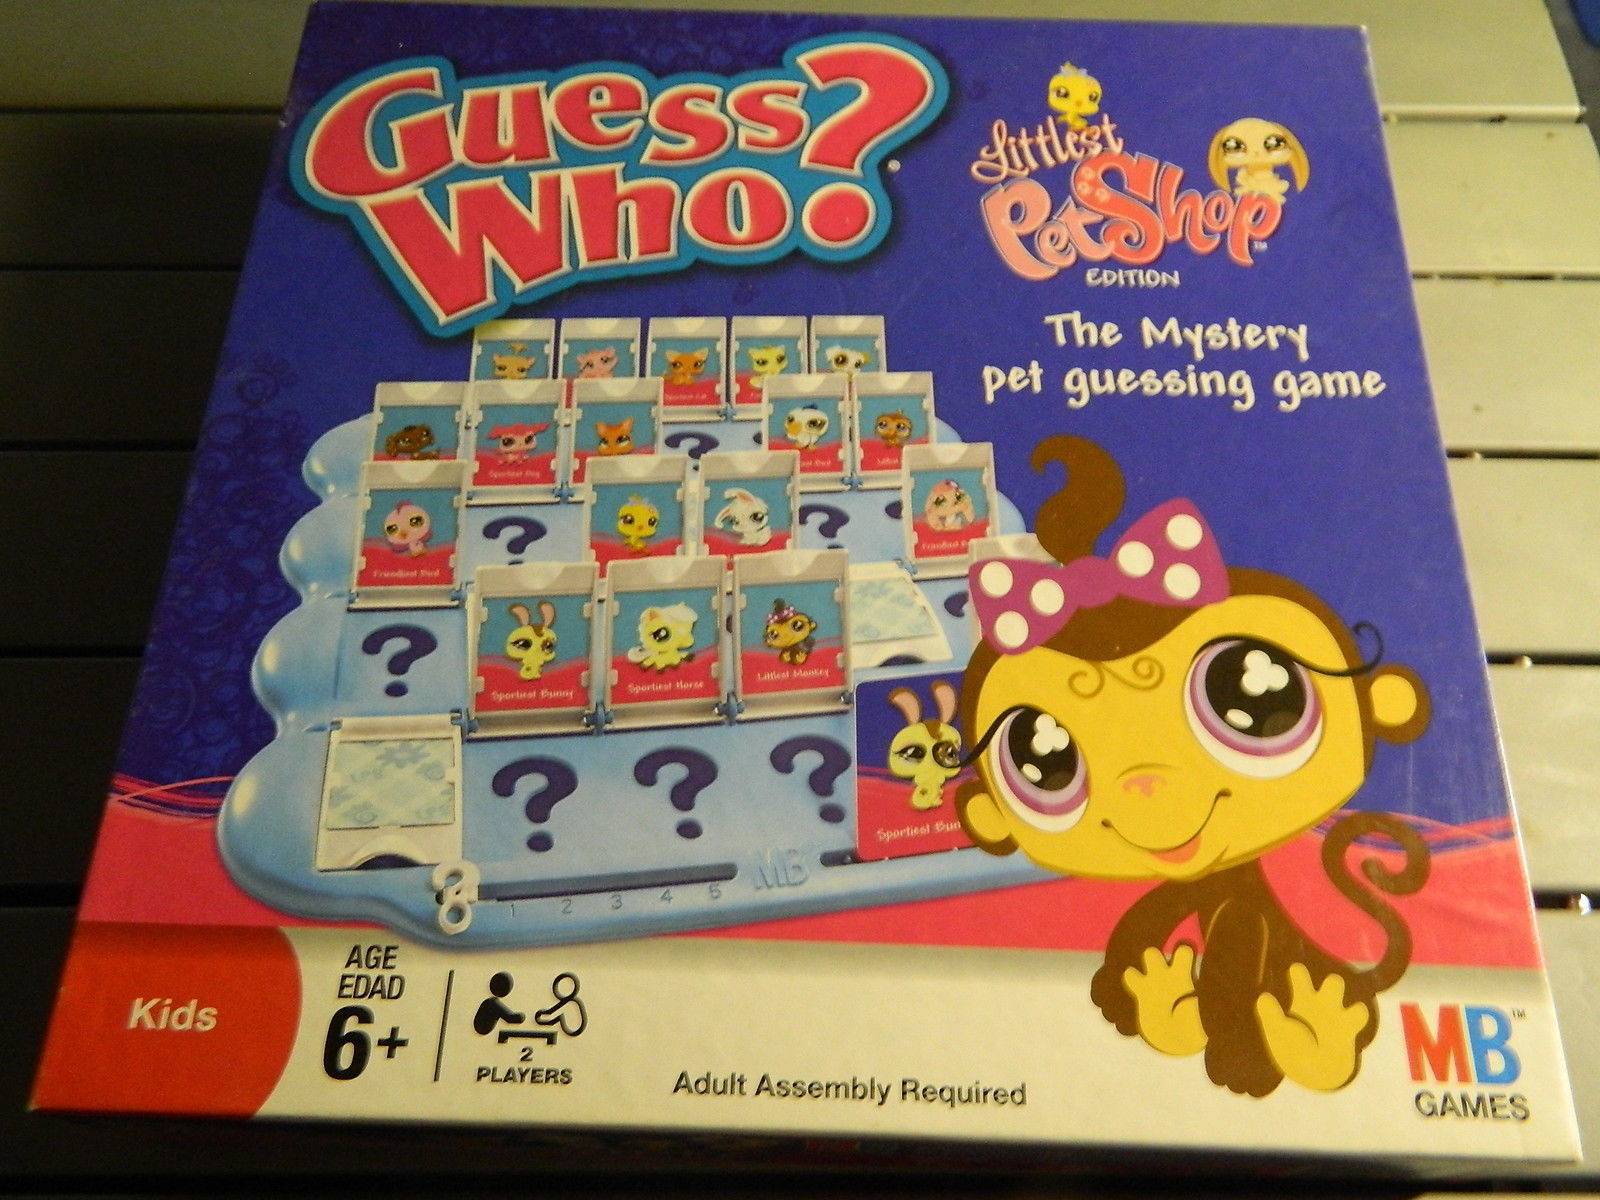 GUESS WHO? GREAT MODERN ORIGINAL 2 PLAYER GUESSING BOARD GAME BY HASBRO  COMPLETE